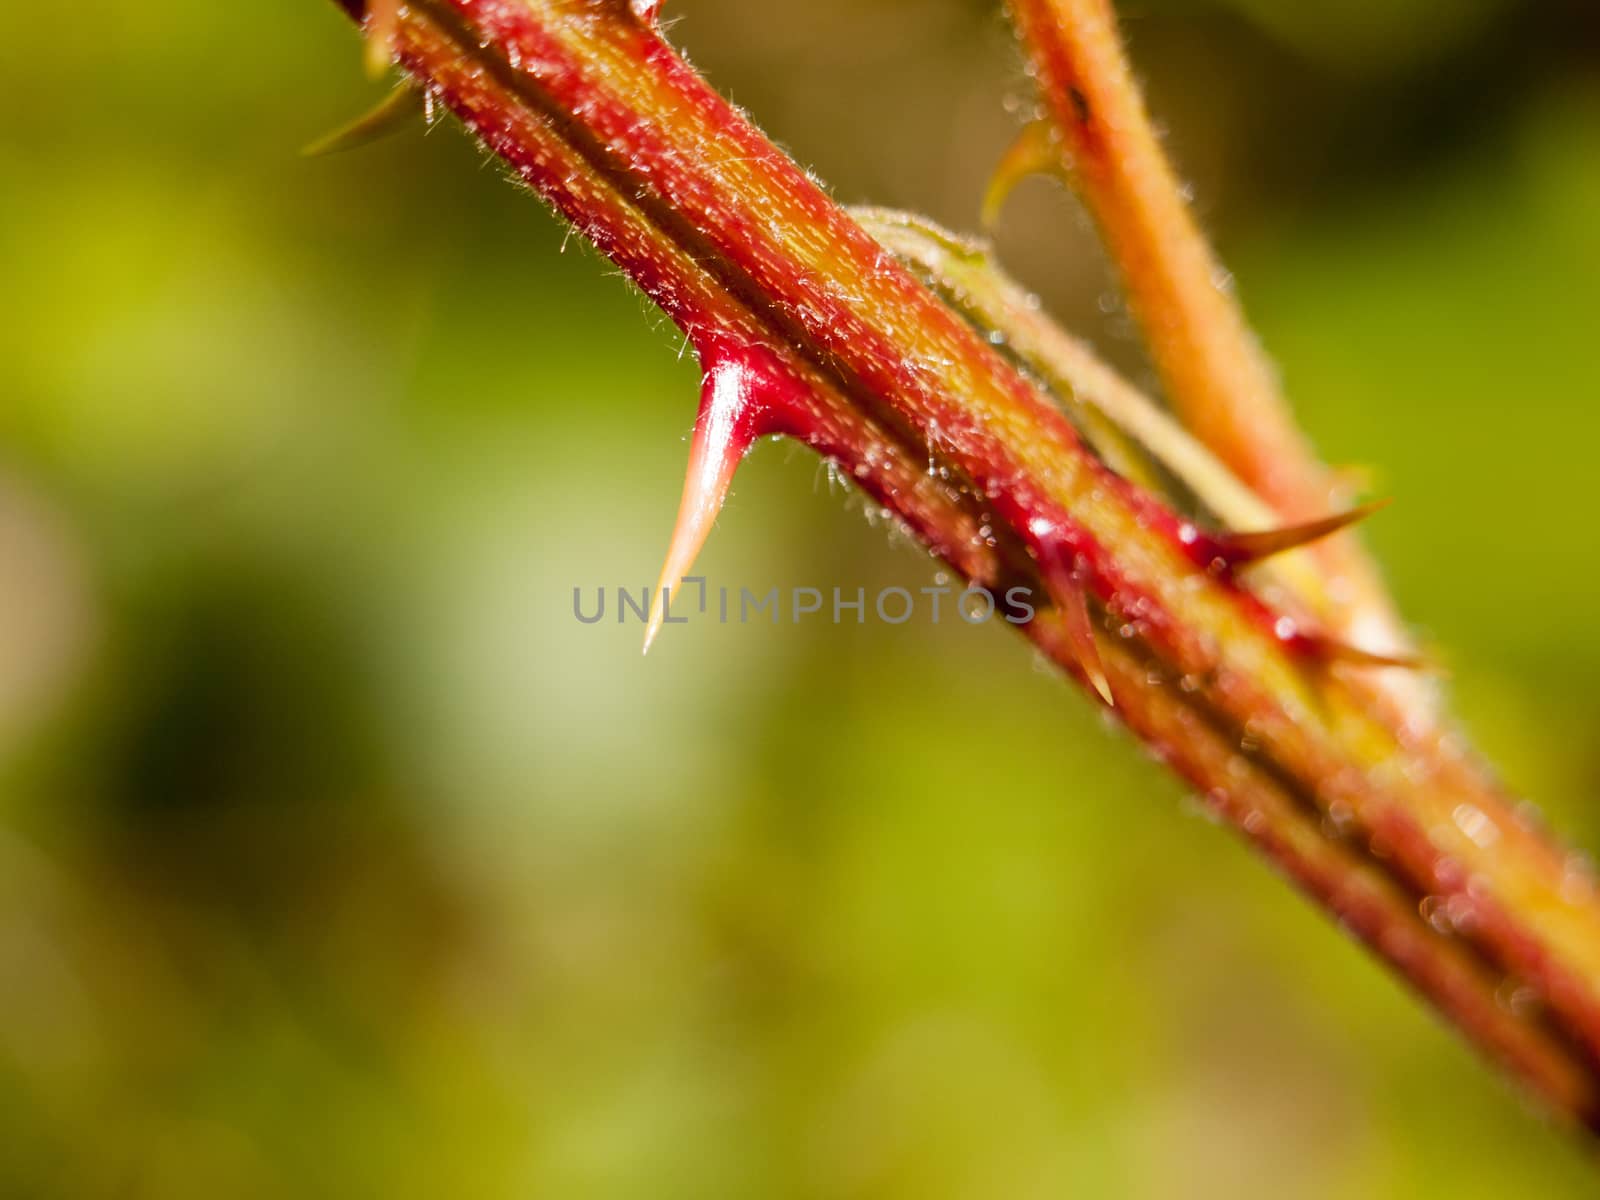 extreme close up on a thorn on a red and hairy branch outside in by callumrc